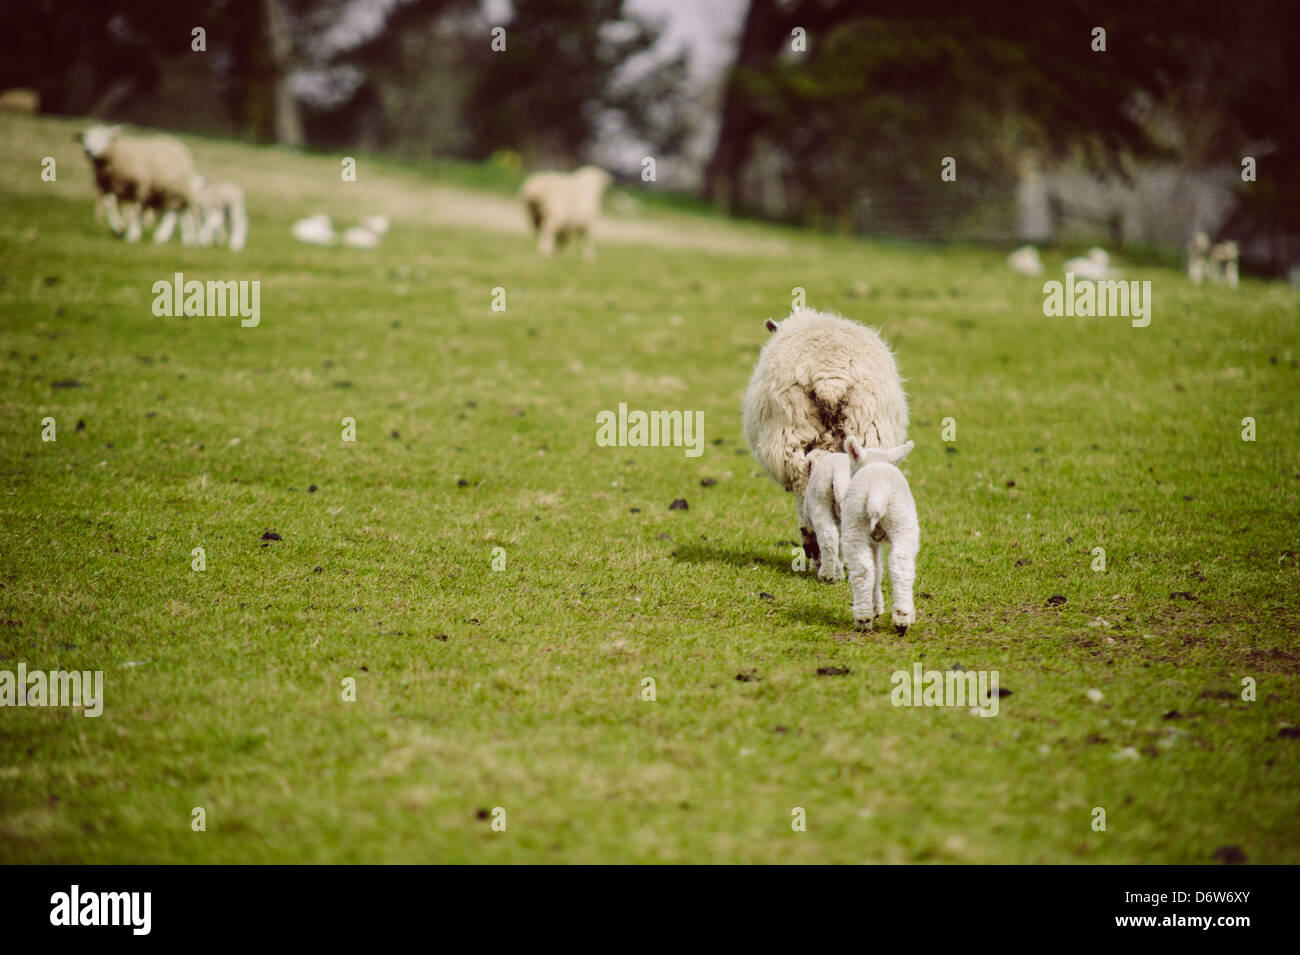 Two young spring lambs follow their mother in a field Stock Photo